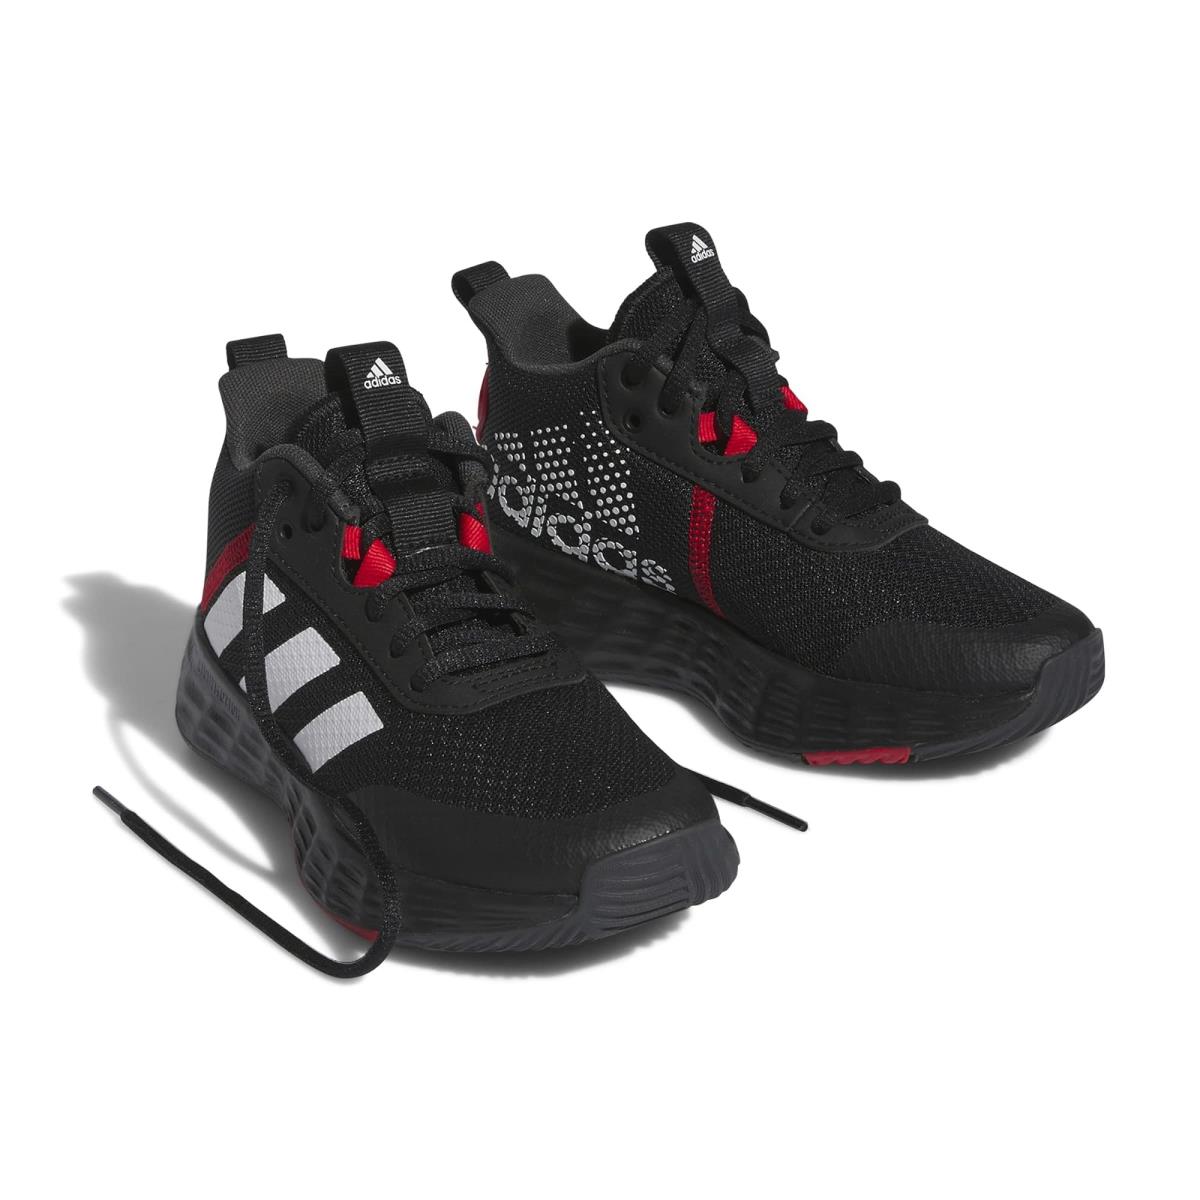 Adidas Unisex-child Own The Game 2.0 Basketball Sh Core Black/White/Vivid Red